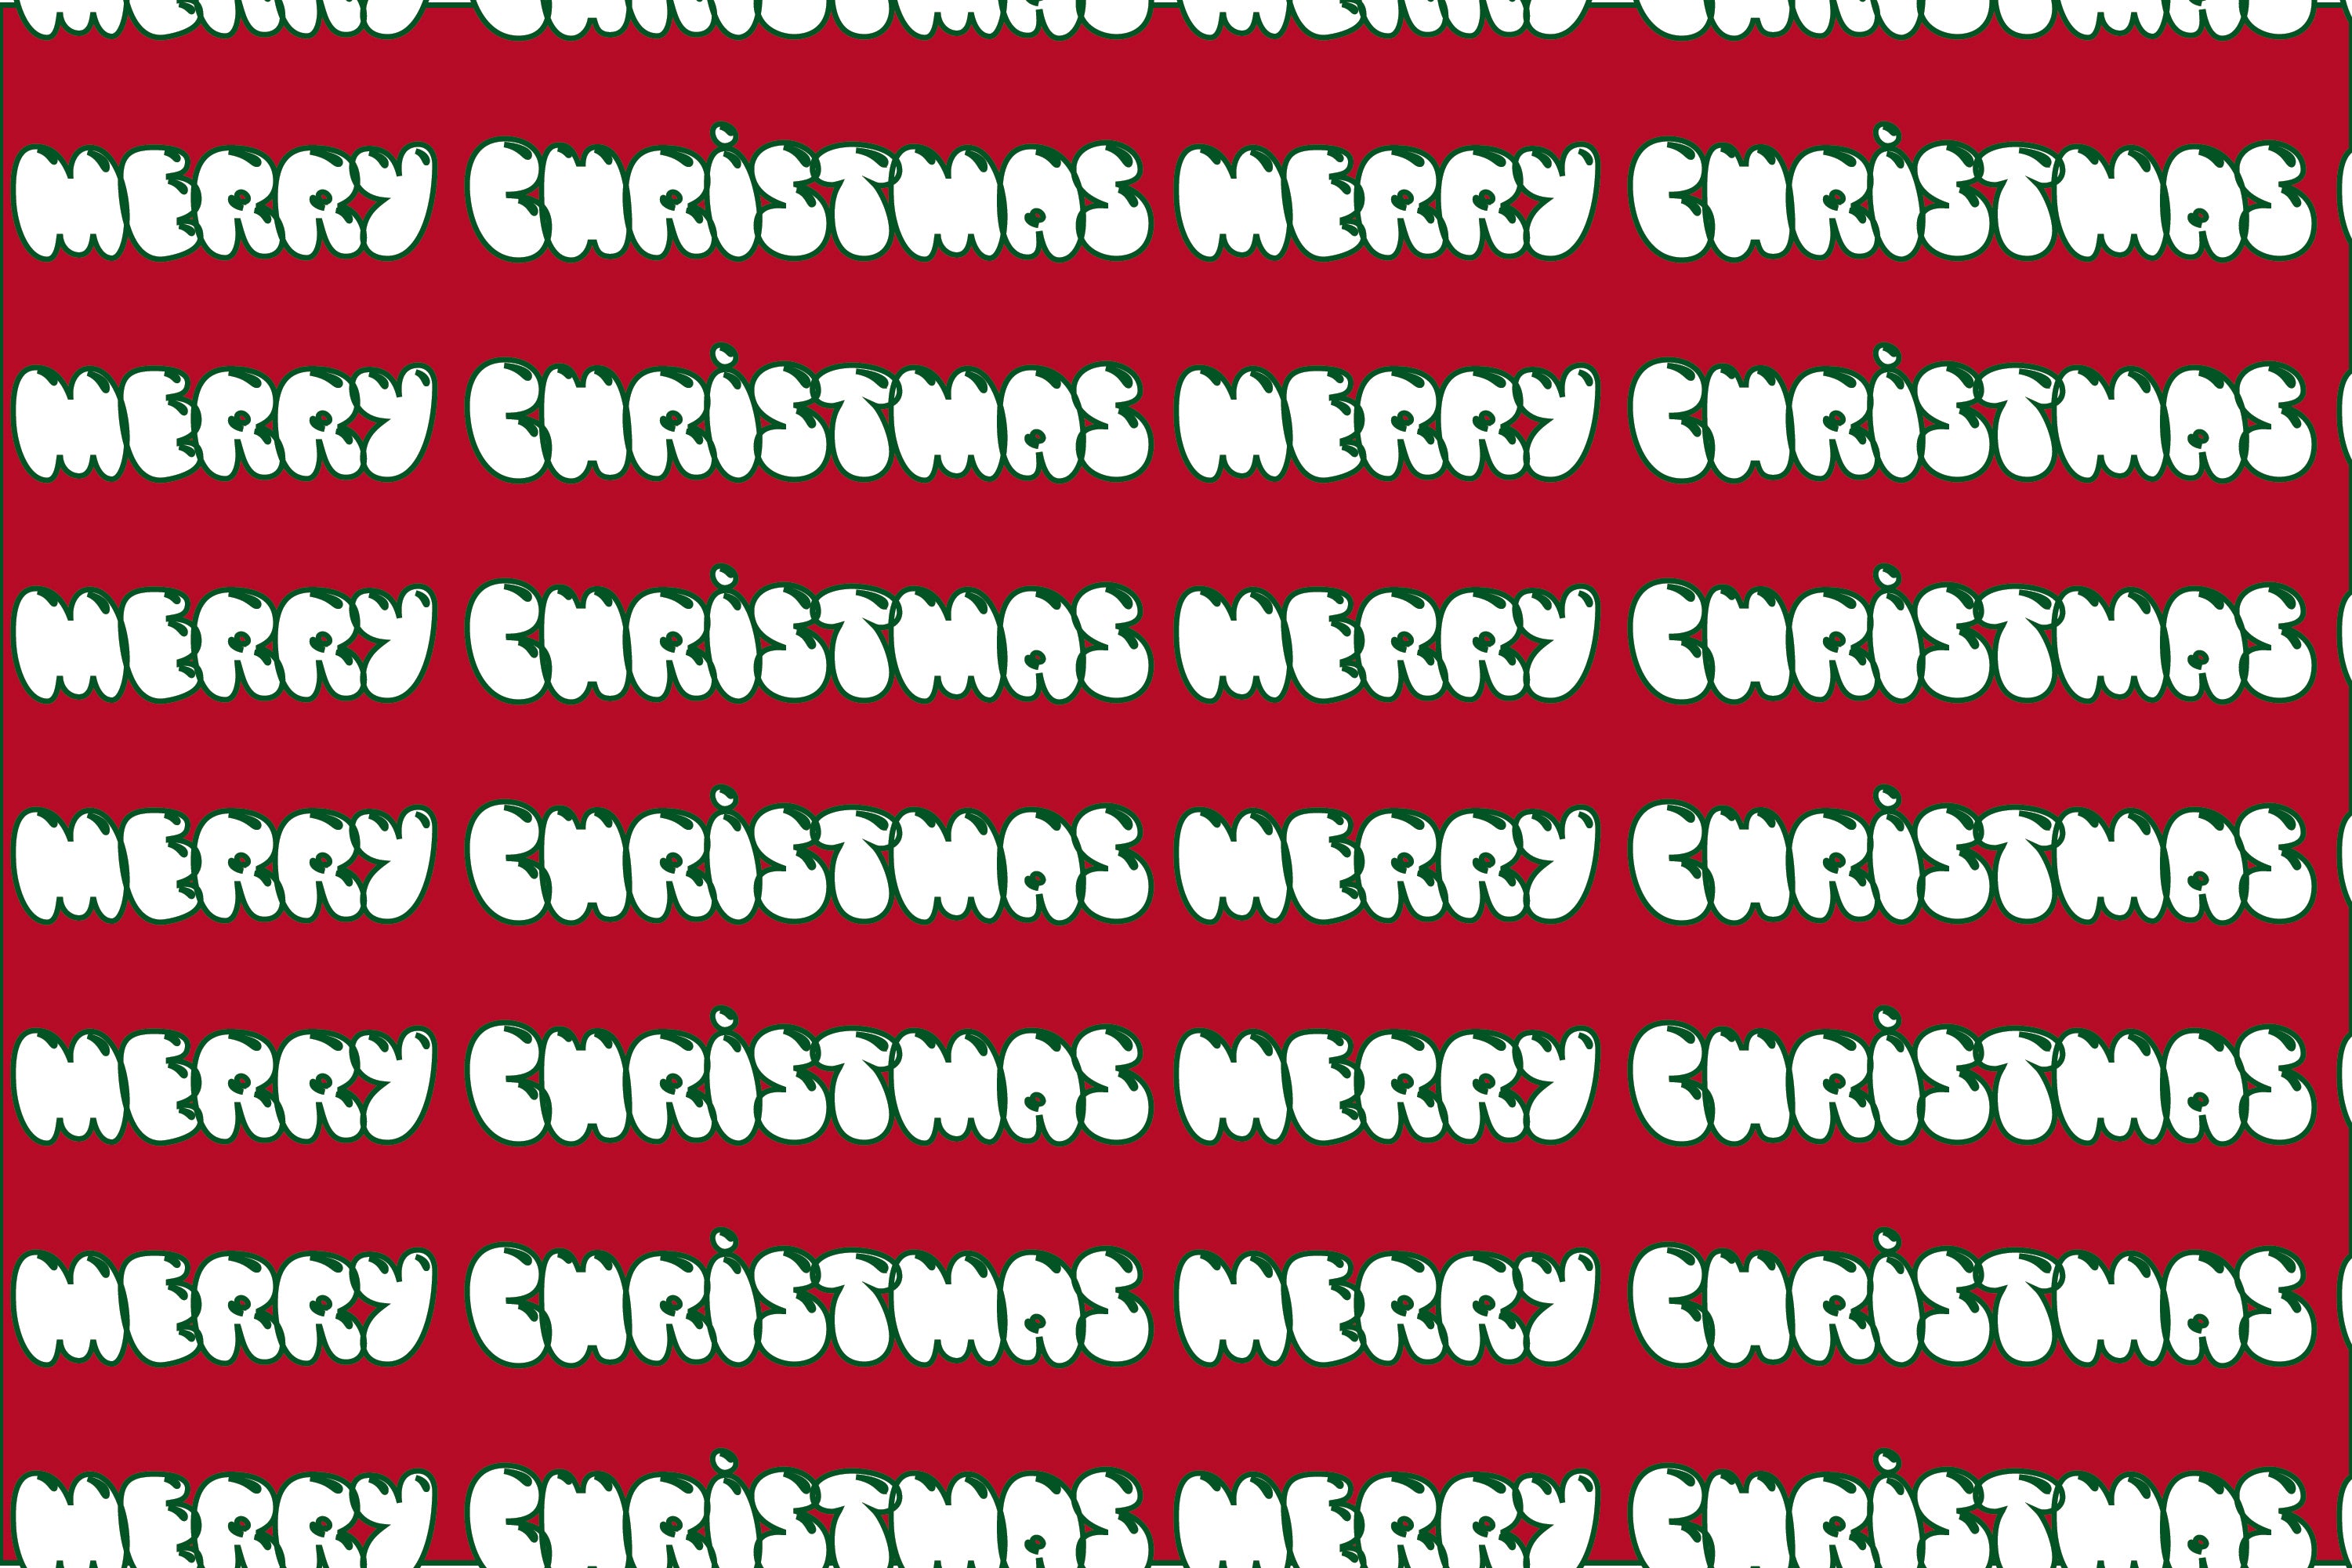 Merry Christmas (on Repeat) - Card